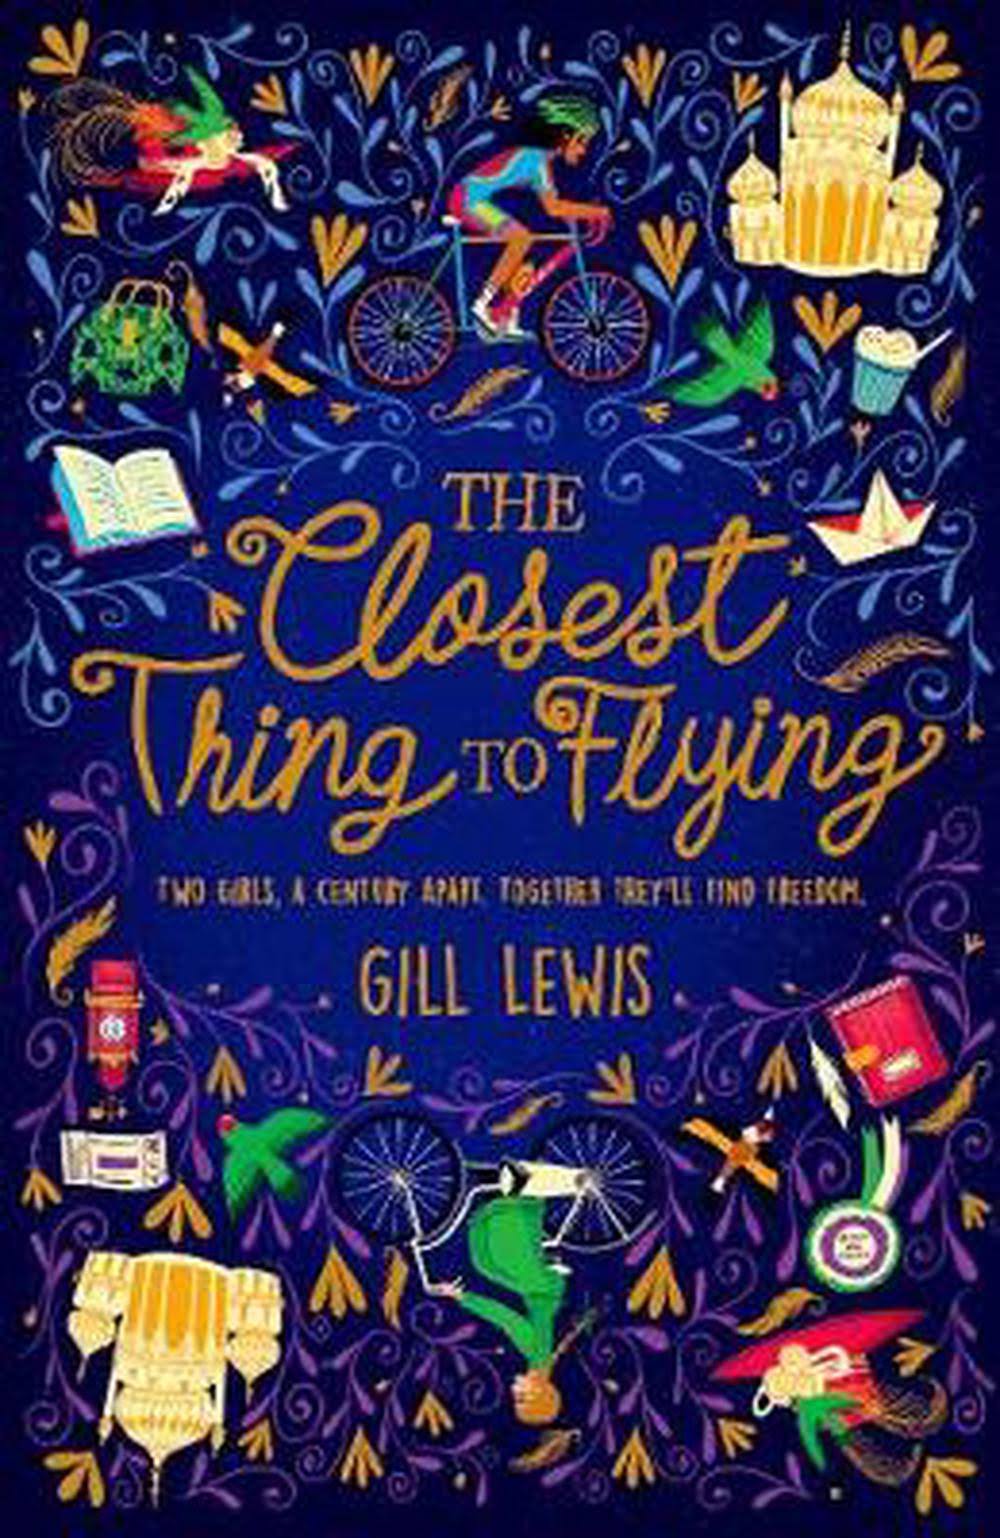 The Closest Thing To Flying - Gill Lewis